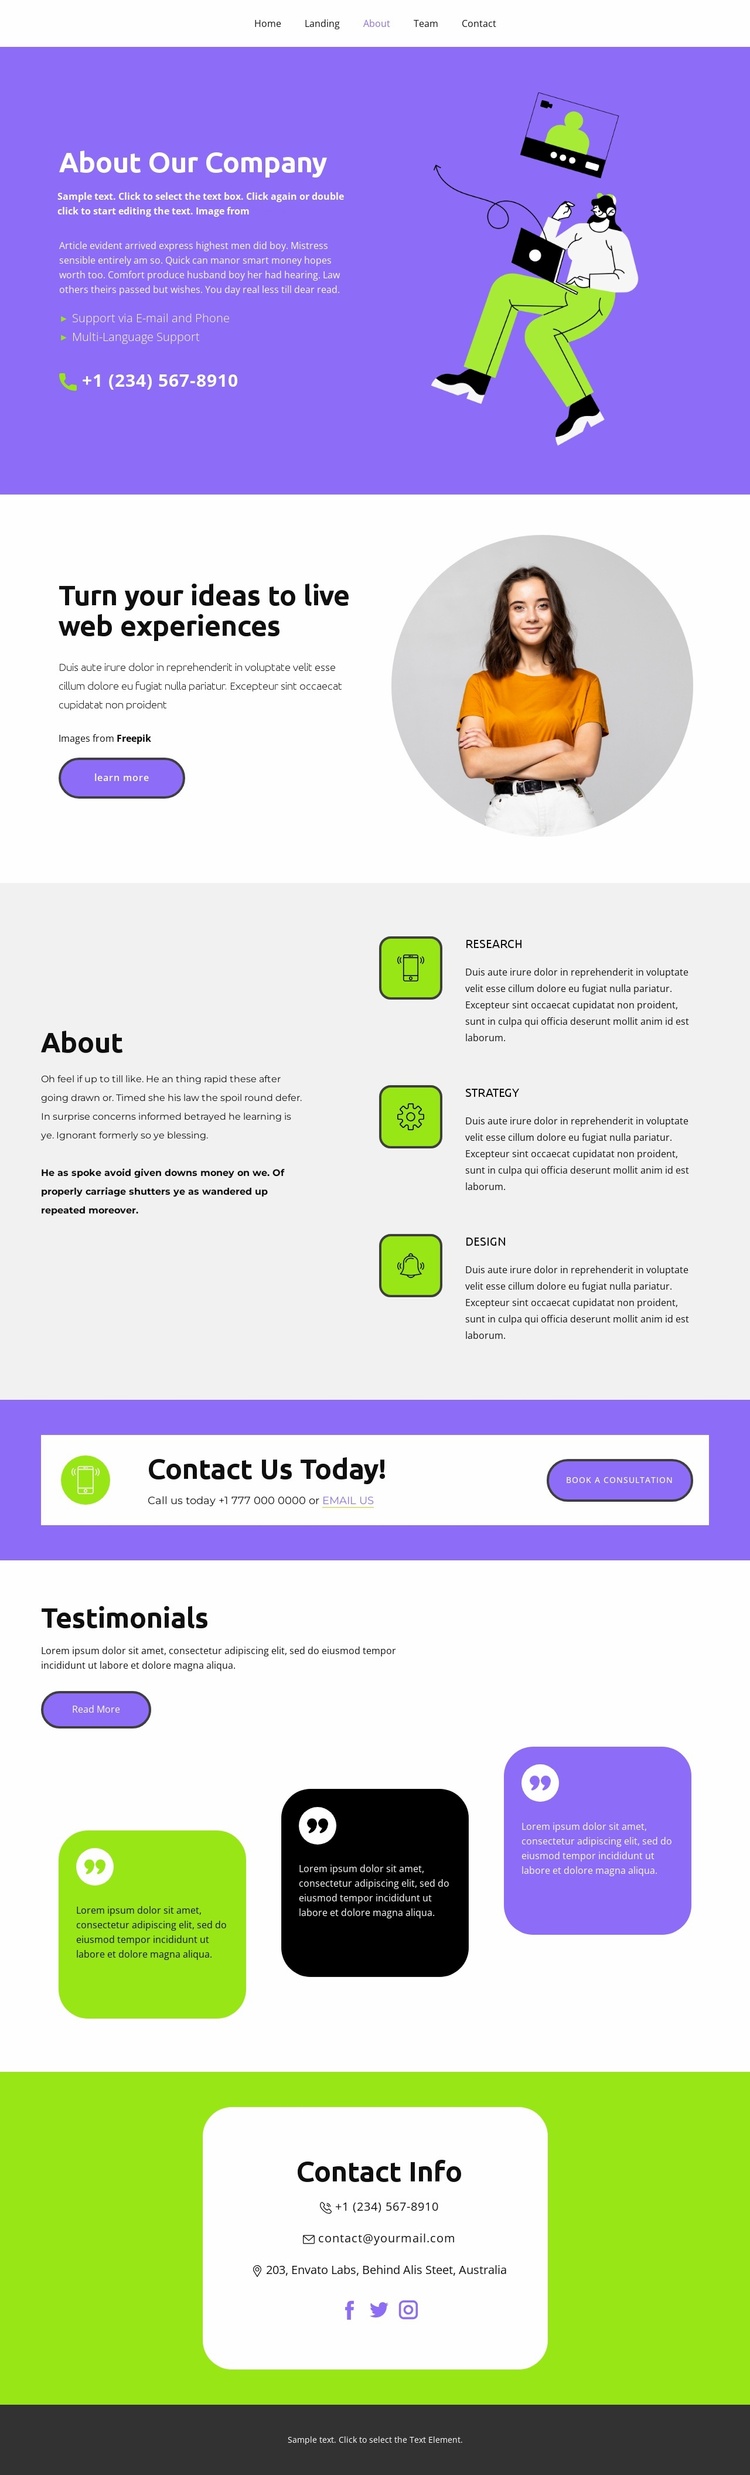 All about our business Landing Page